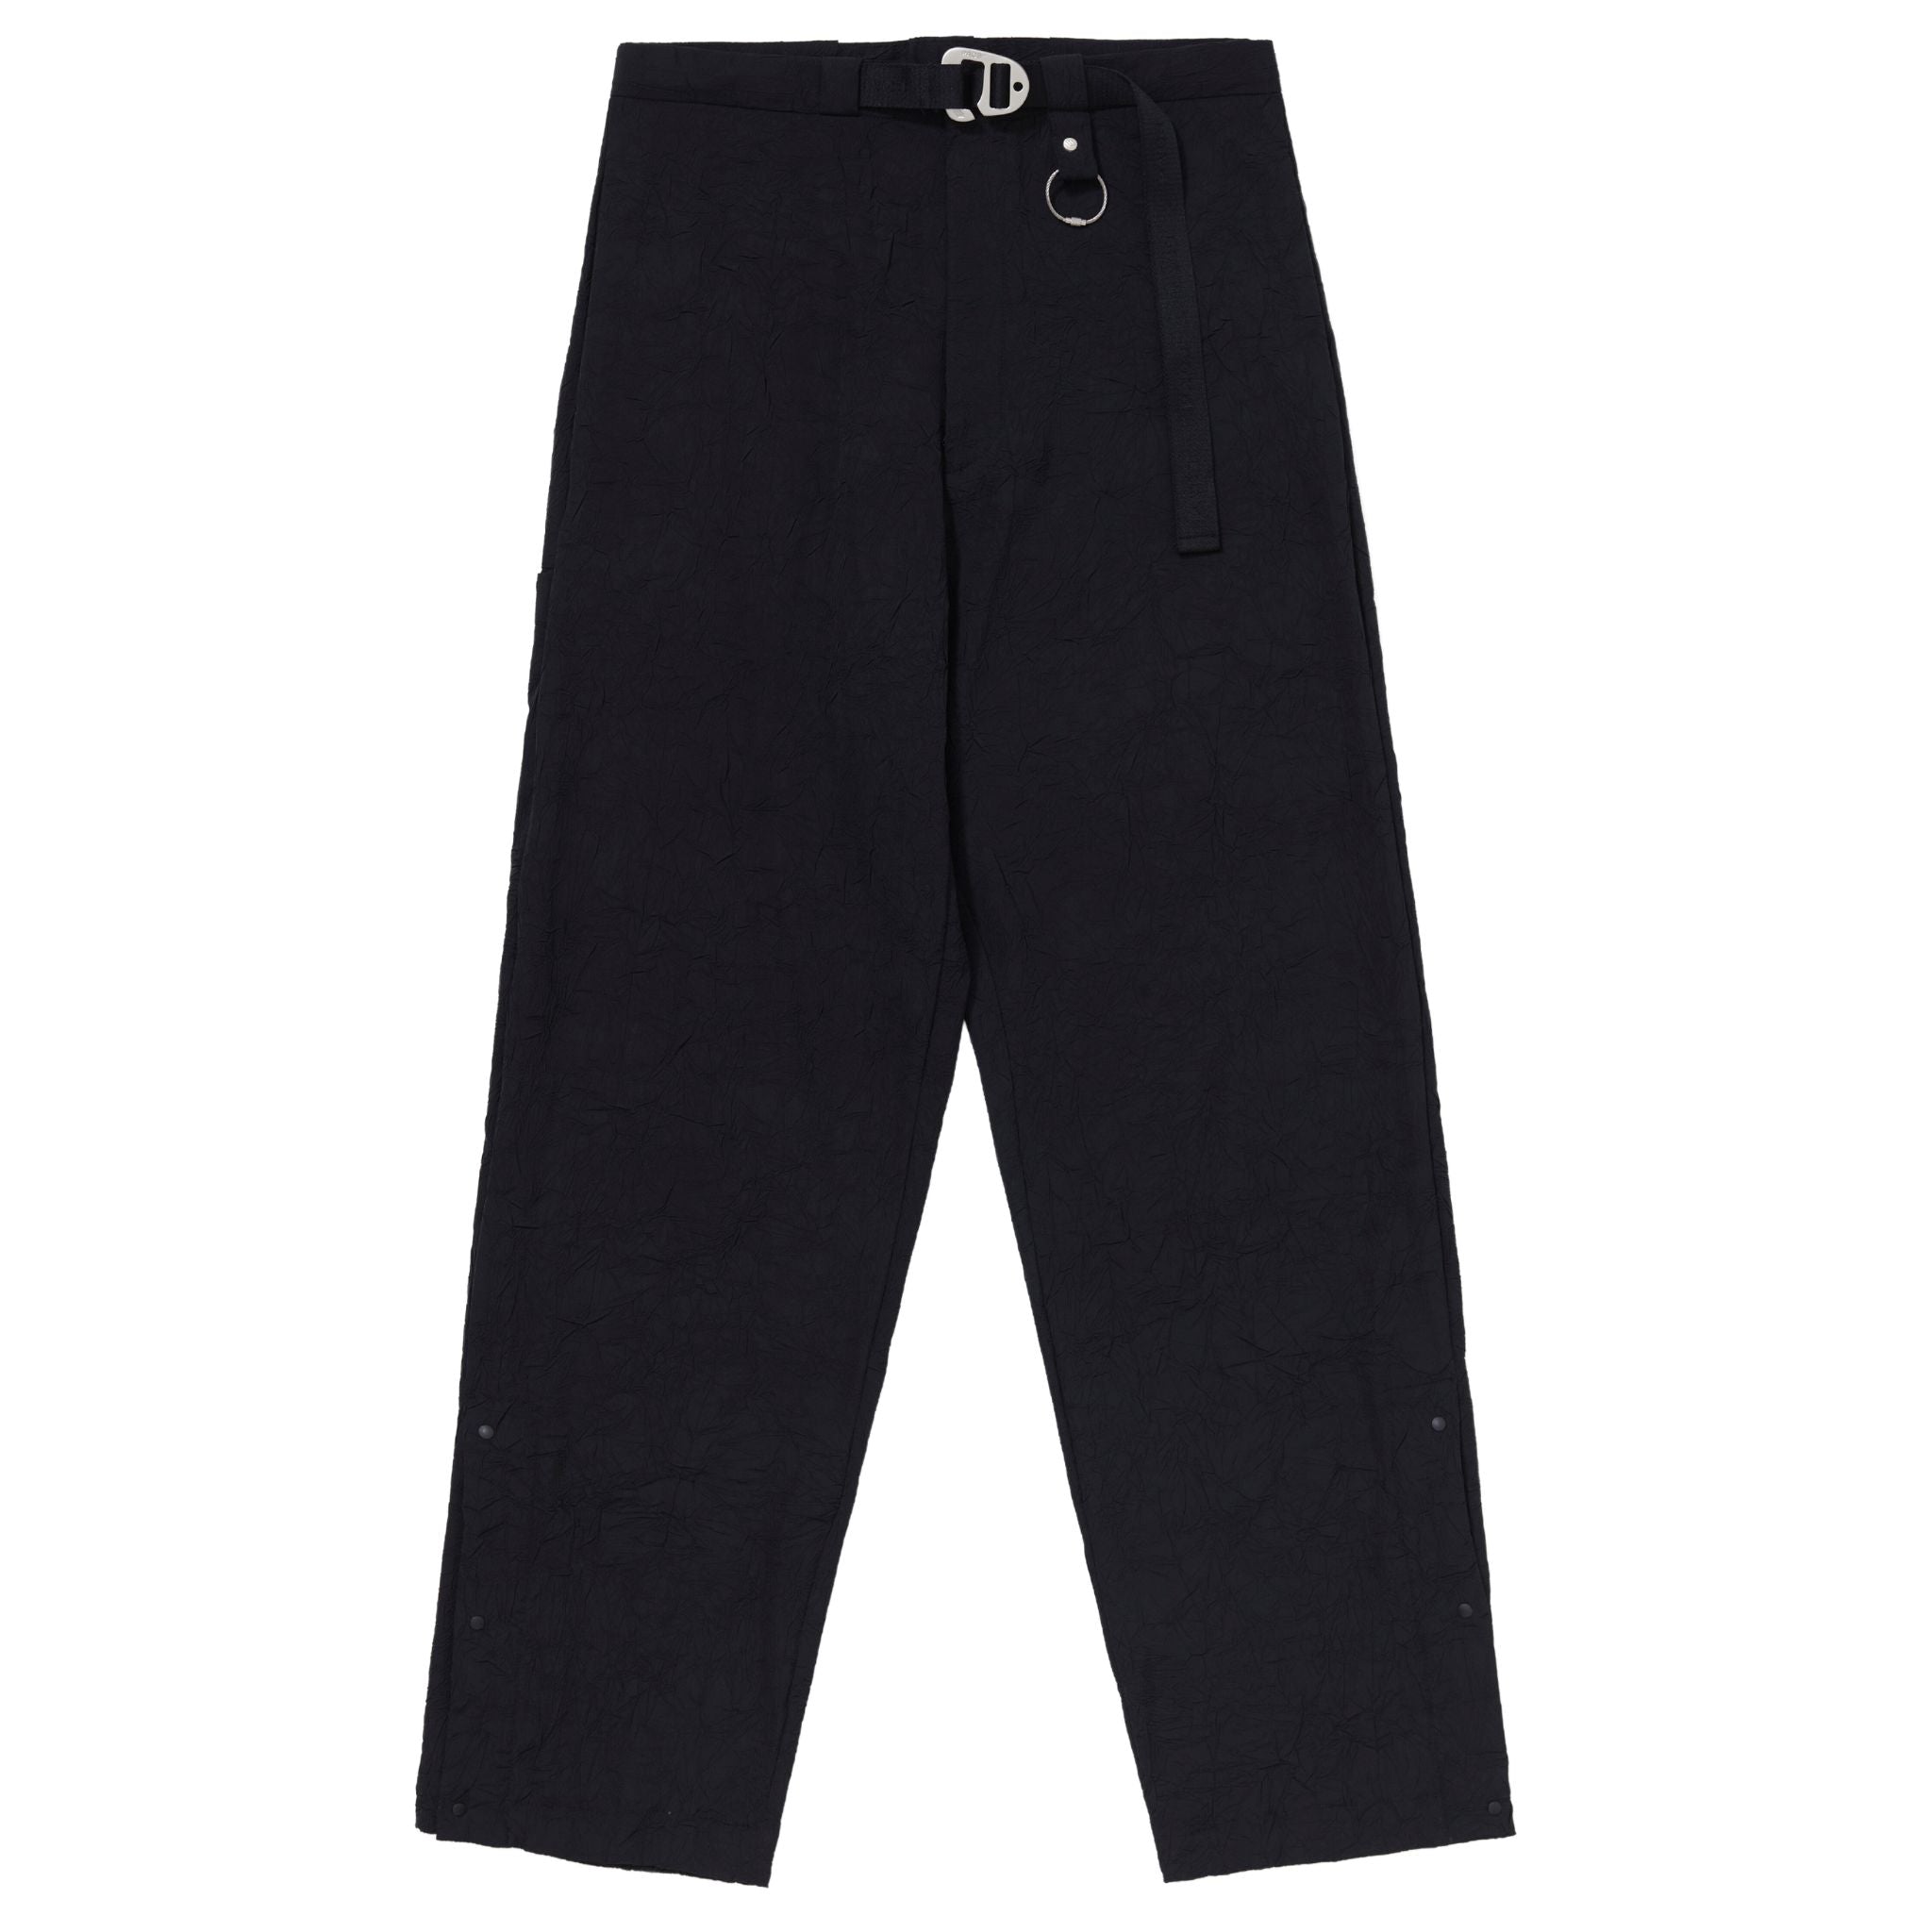 PACE - Shiwa Trousers "Black" - THE GAME